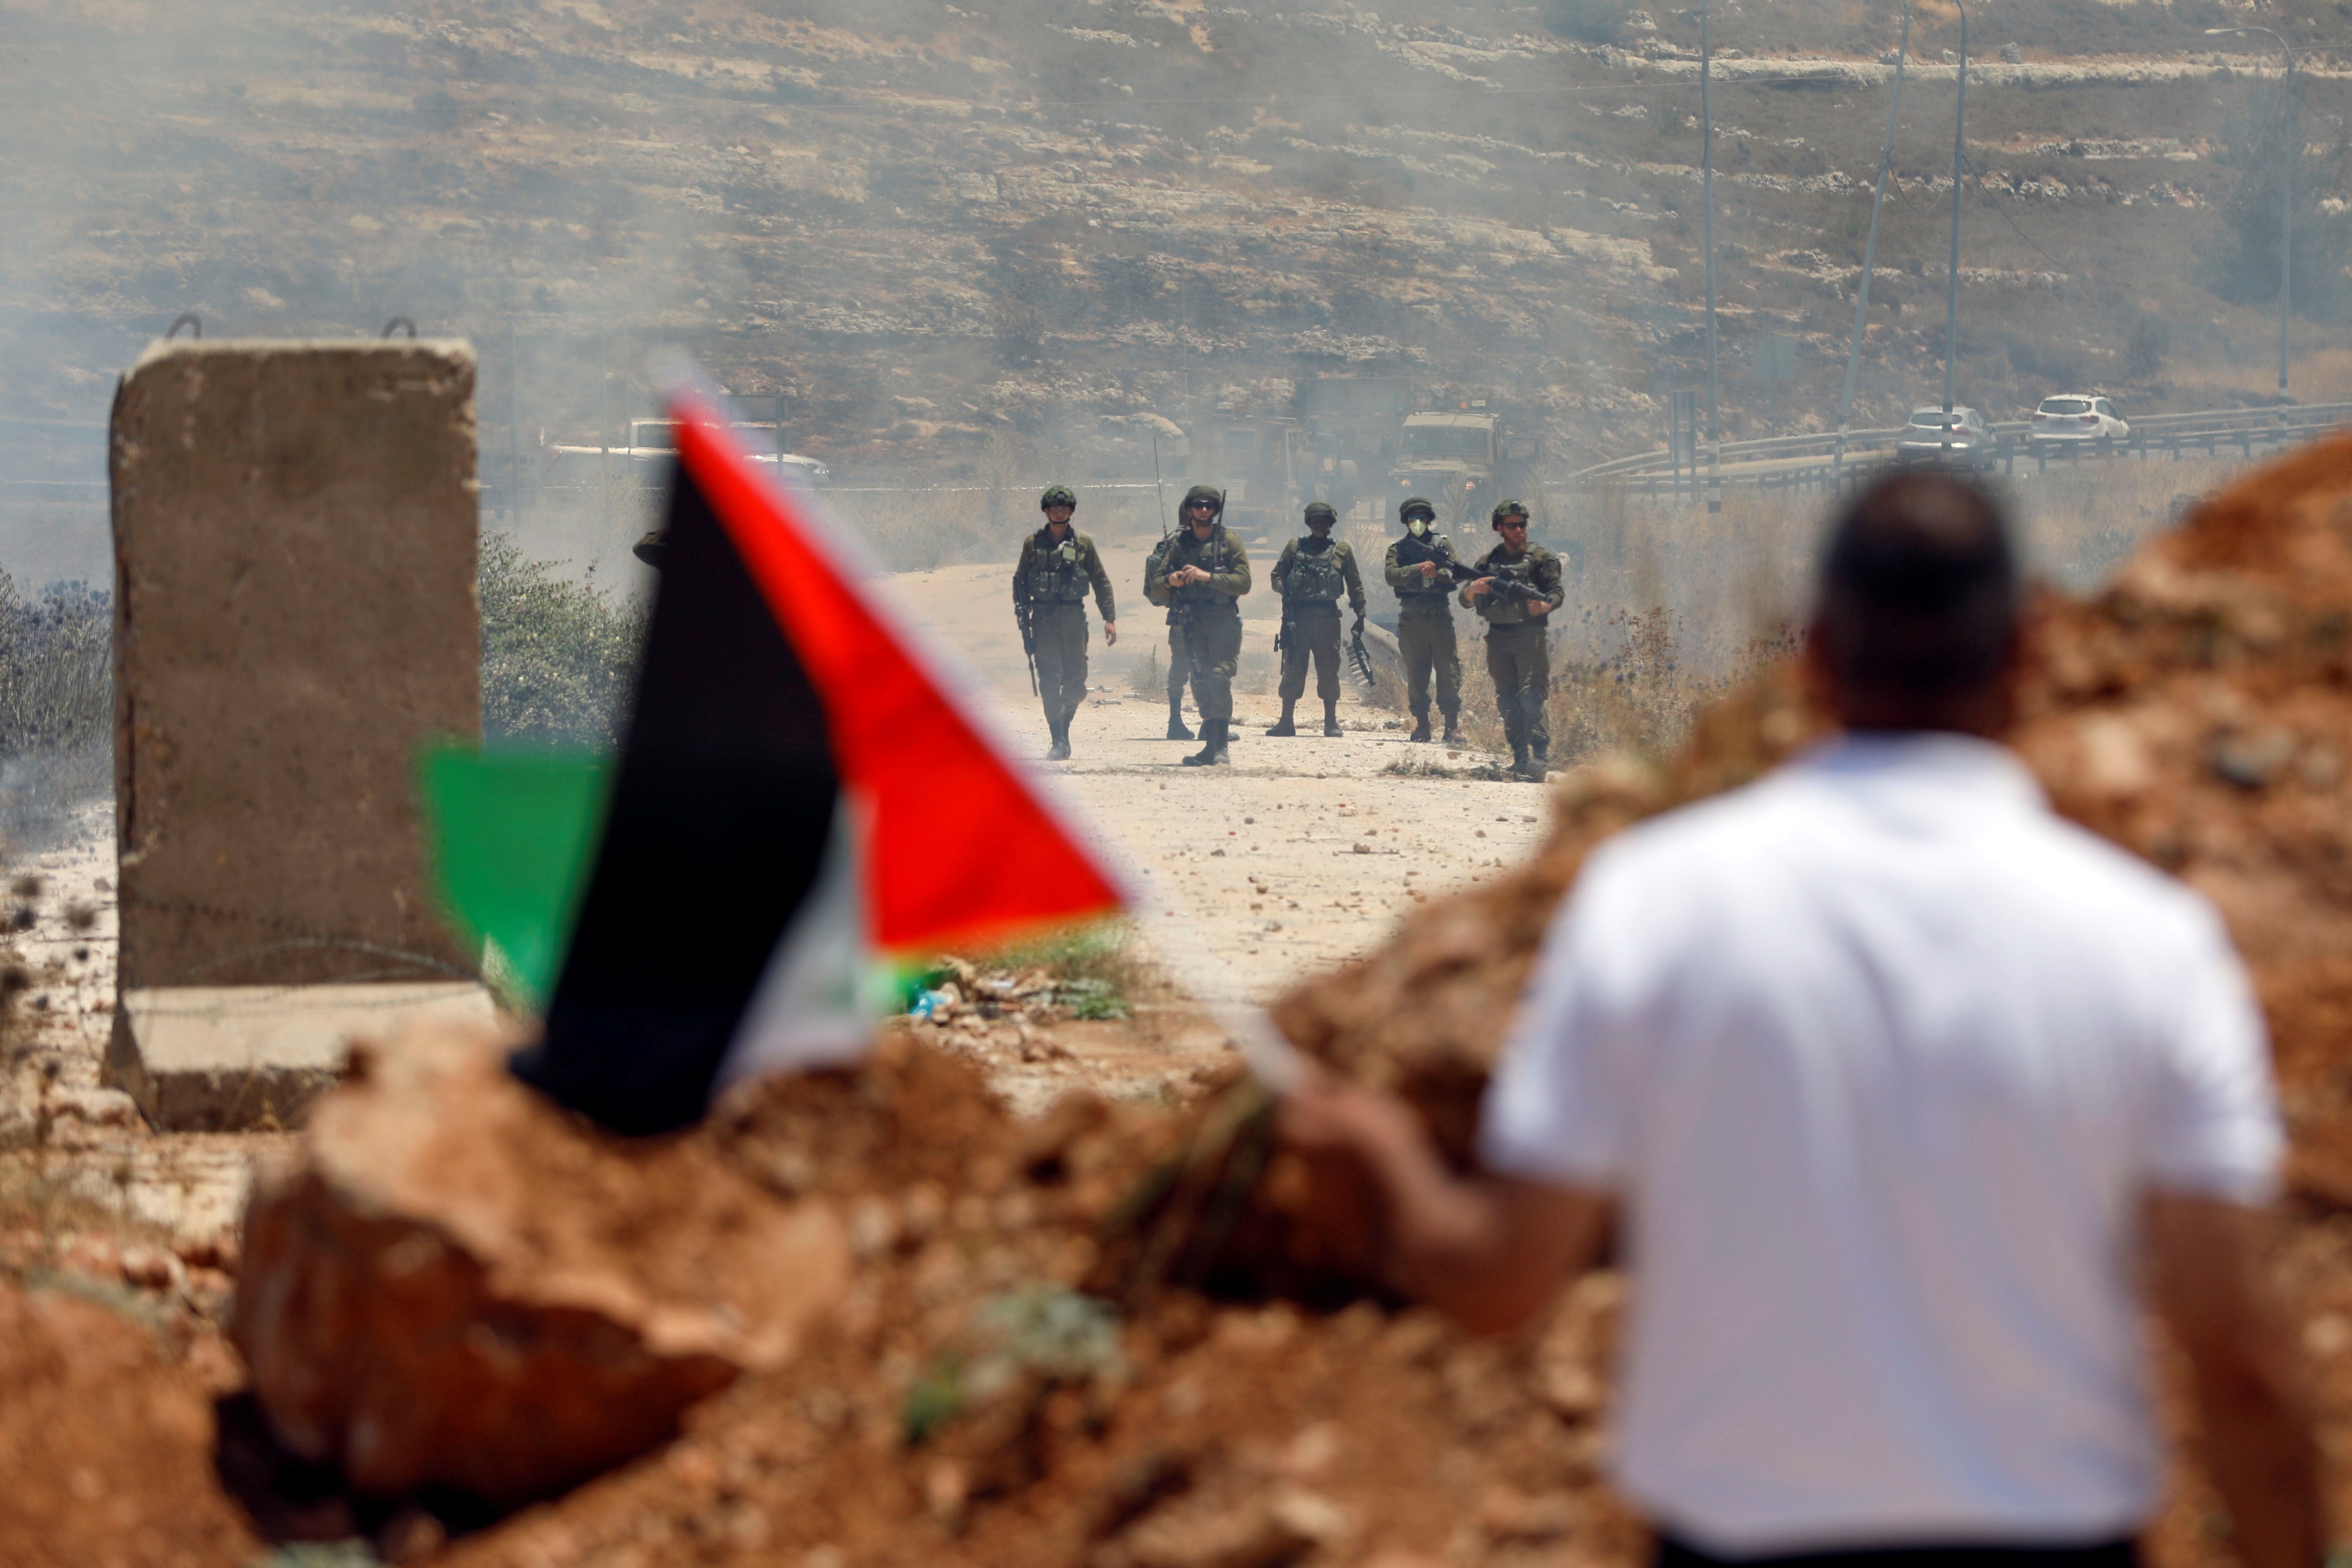  A demonstrator waves a Palestinian flag in front of Israeli forces in the Israeli-occupied West Bank on 25 June (Reuters)